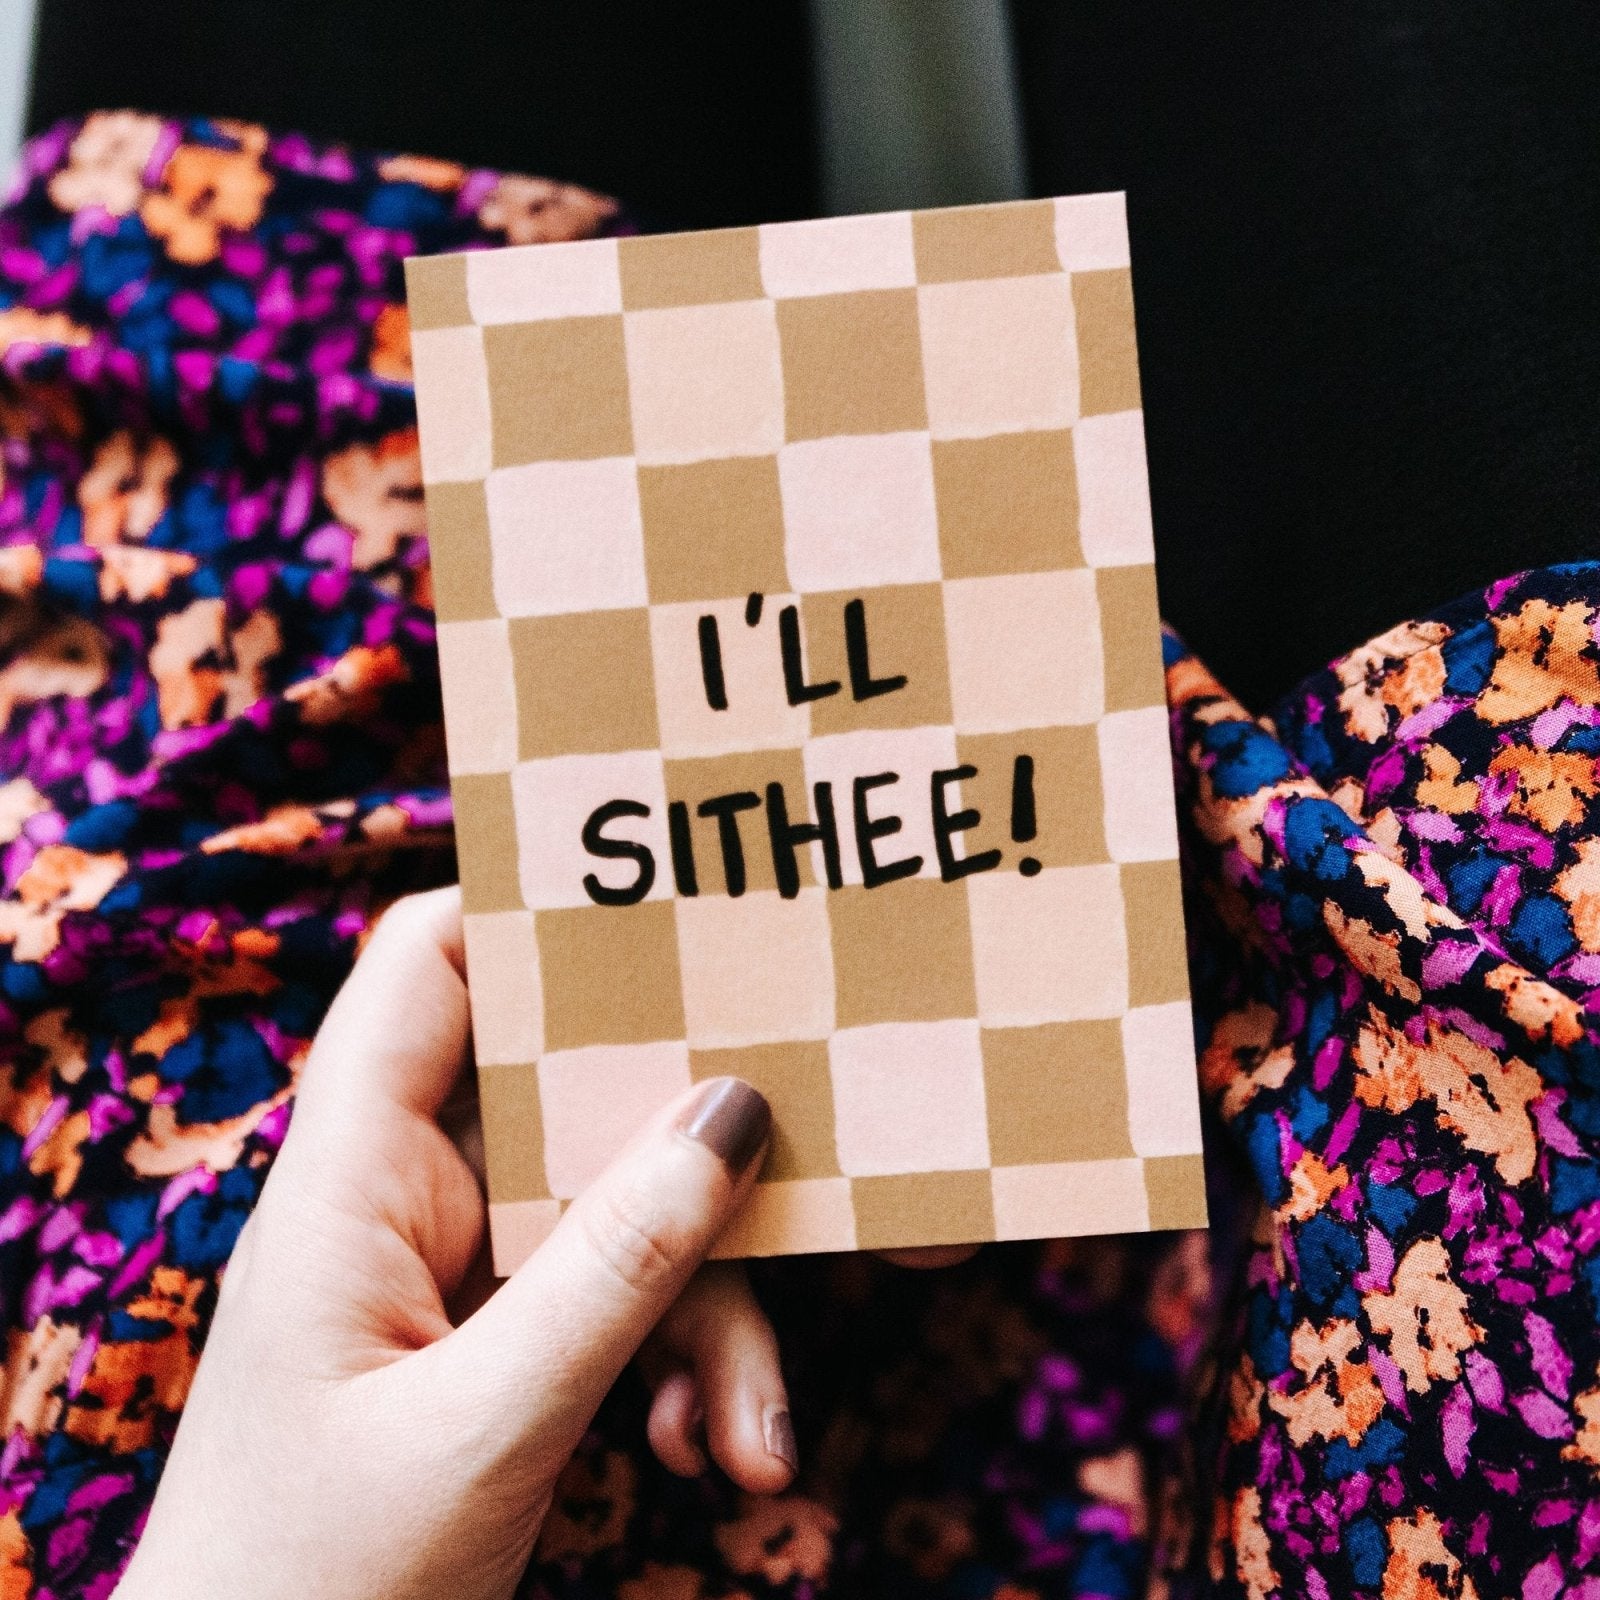 I&#39;ll Sithee! Yorkshire Dialect Funny Leaving Card - I am Nat Ltd - Greeting Card